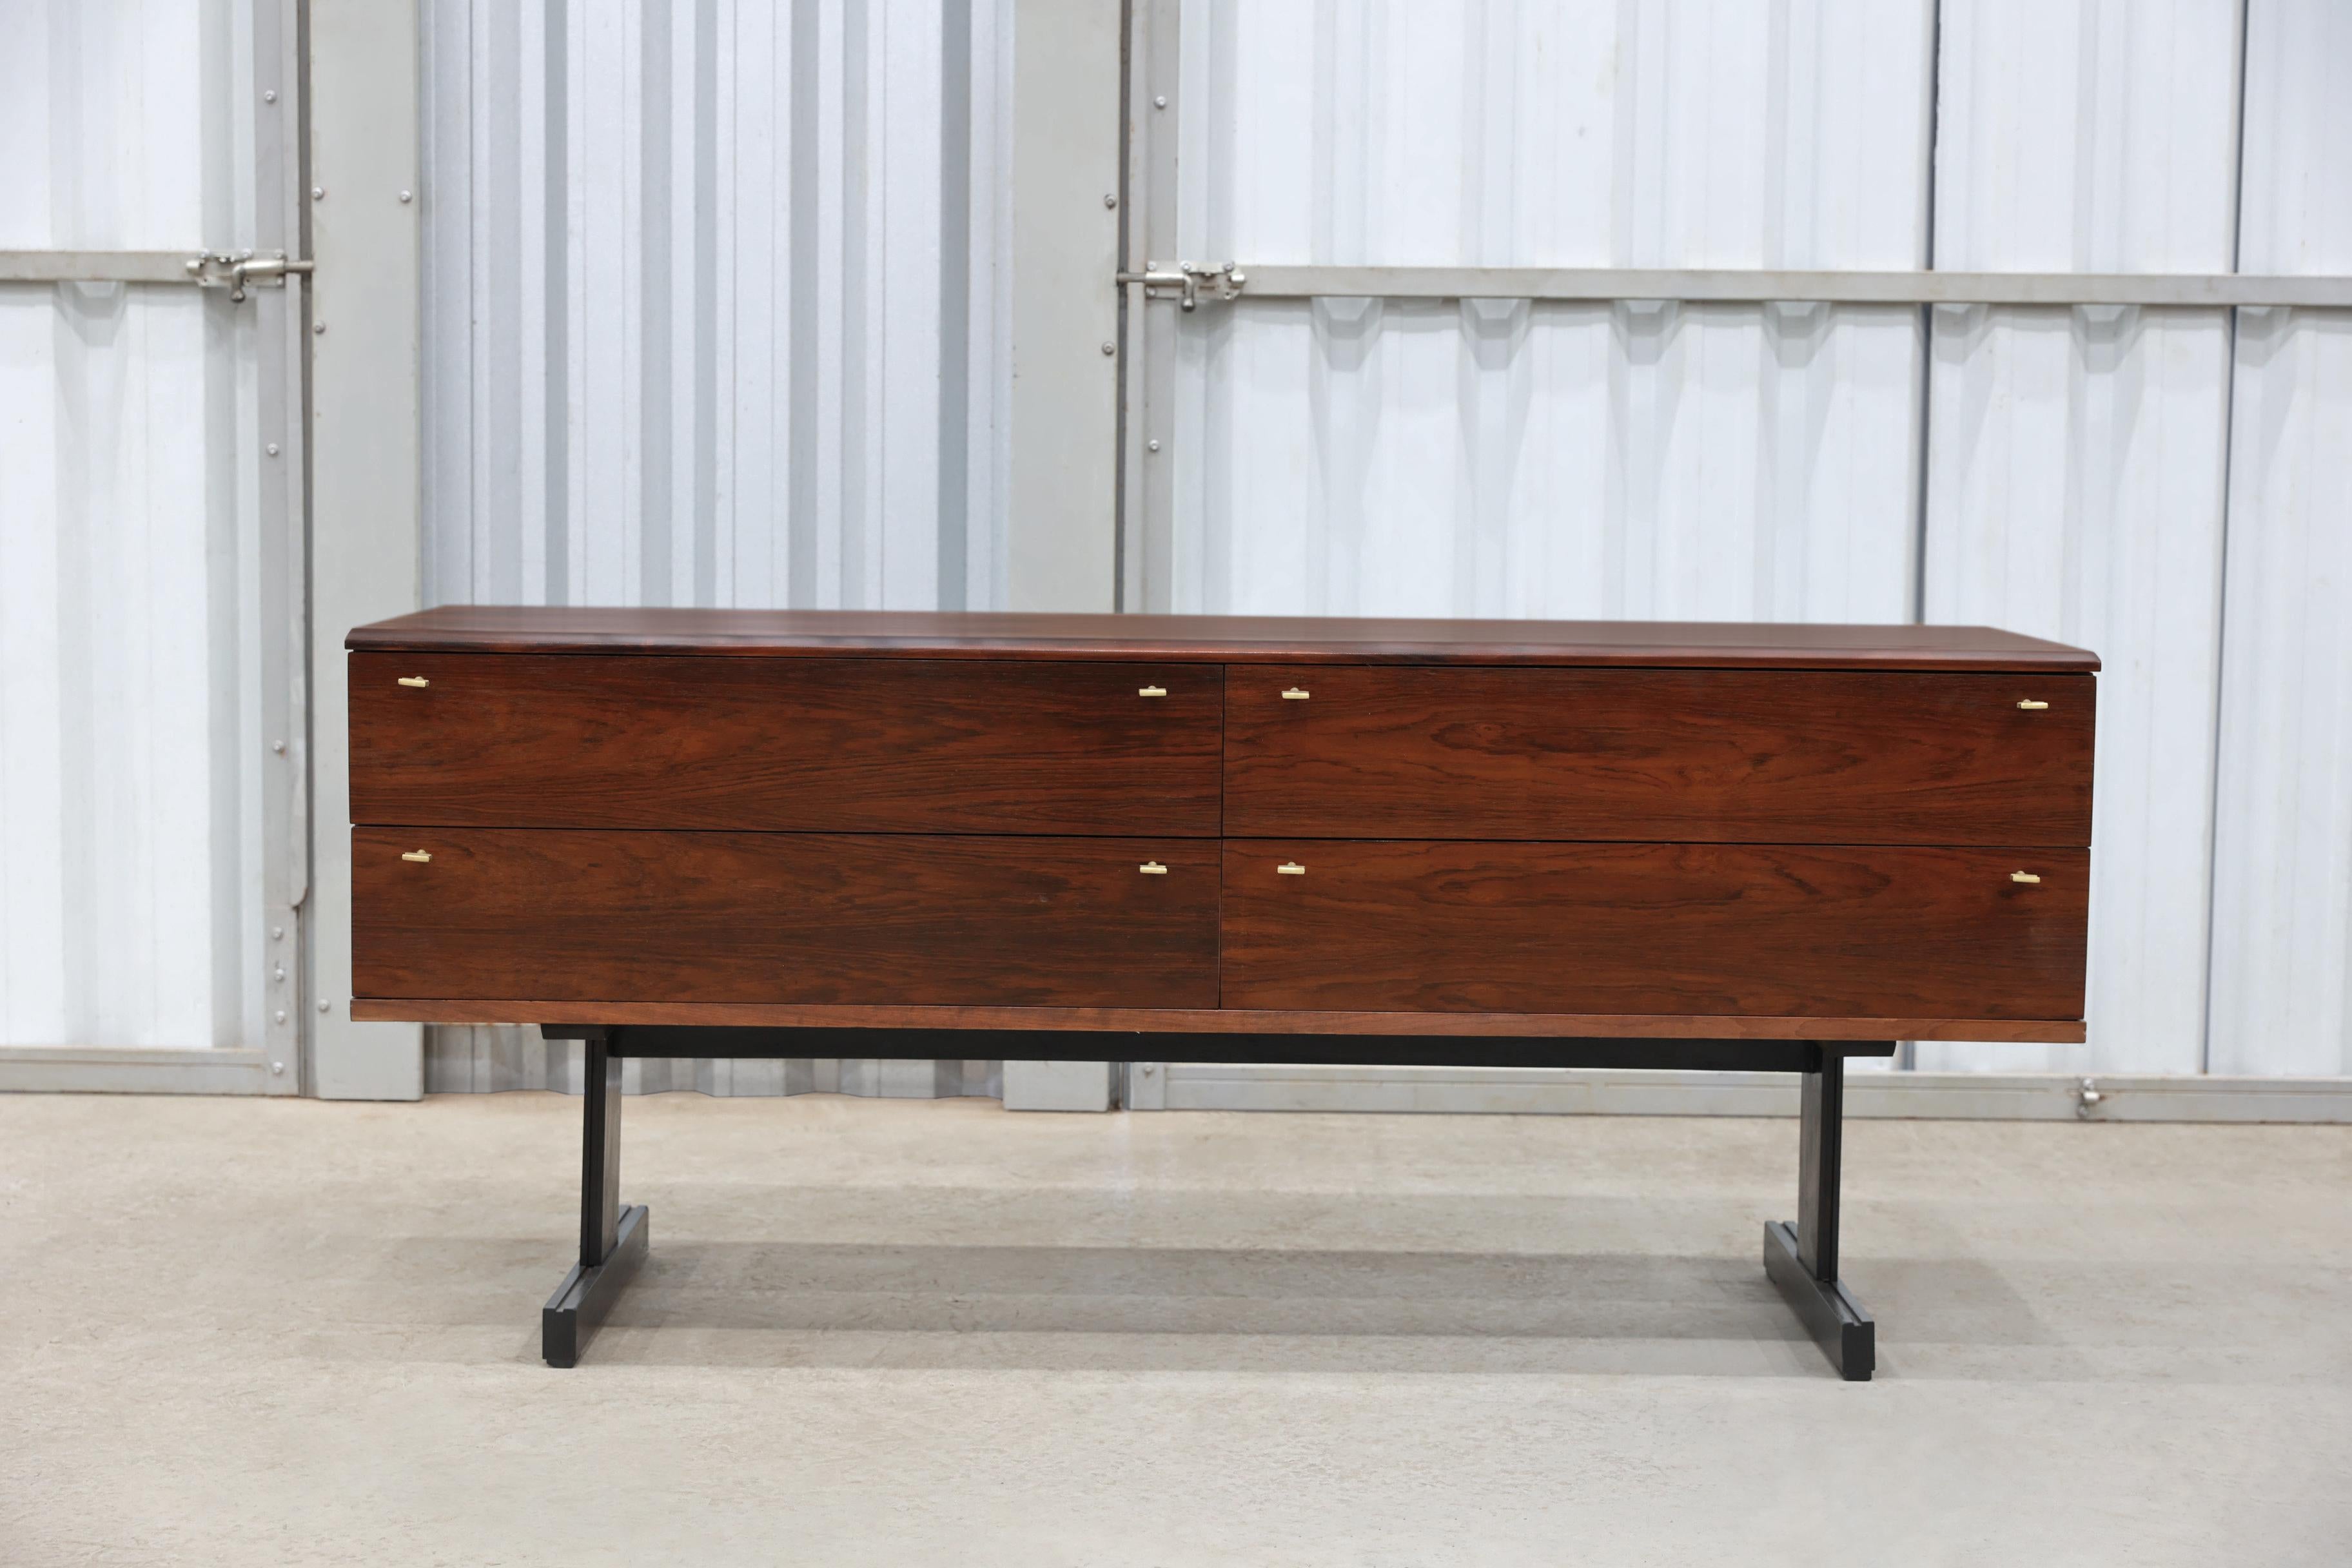 This sideboard designed by Cimo during the sixties in Brazil is made in Brazilian Rosewood, known as Jacaranda. The main structure has 4 large drawers with brass handles and it stands in two slim legs. The woodwork is excellent and the space is